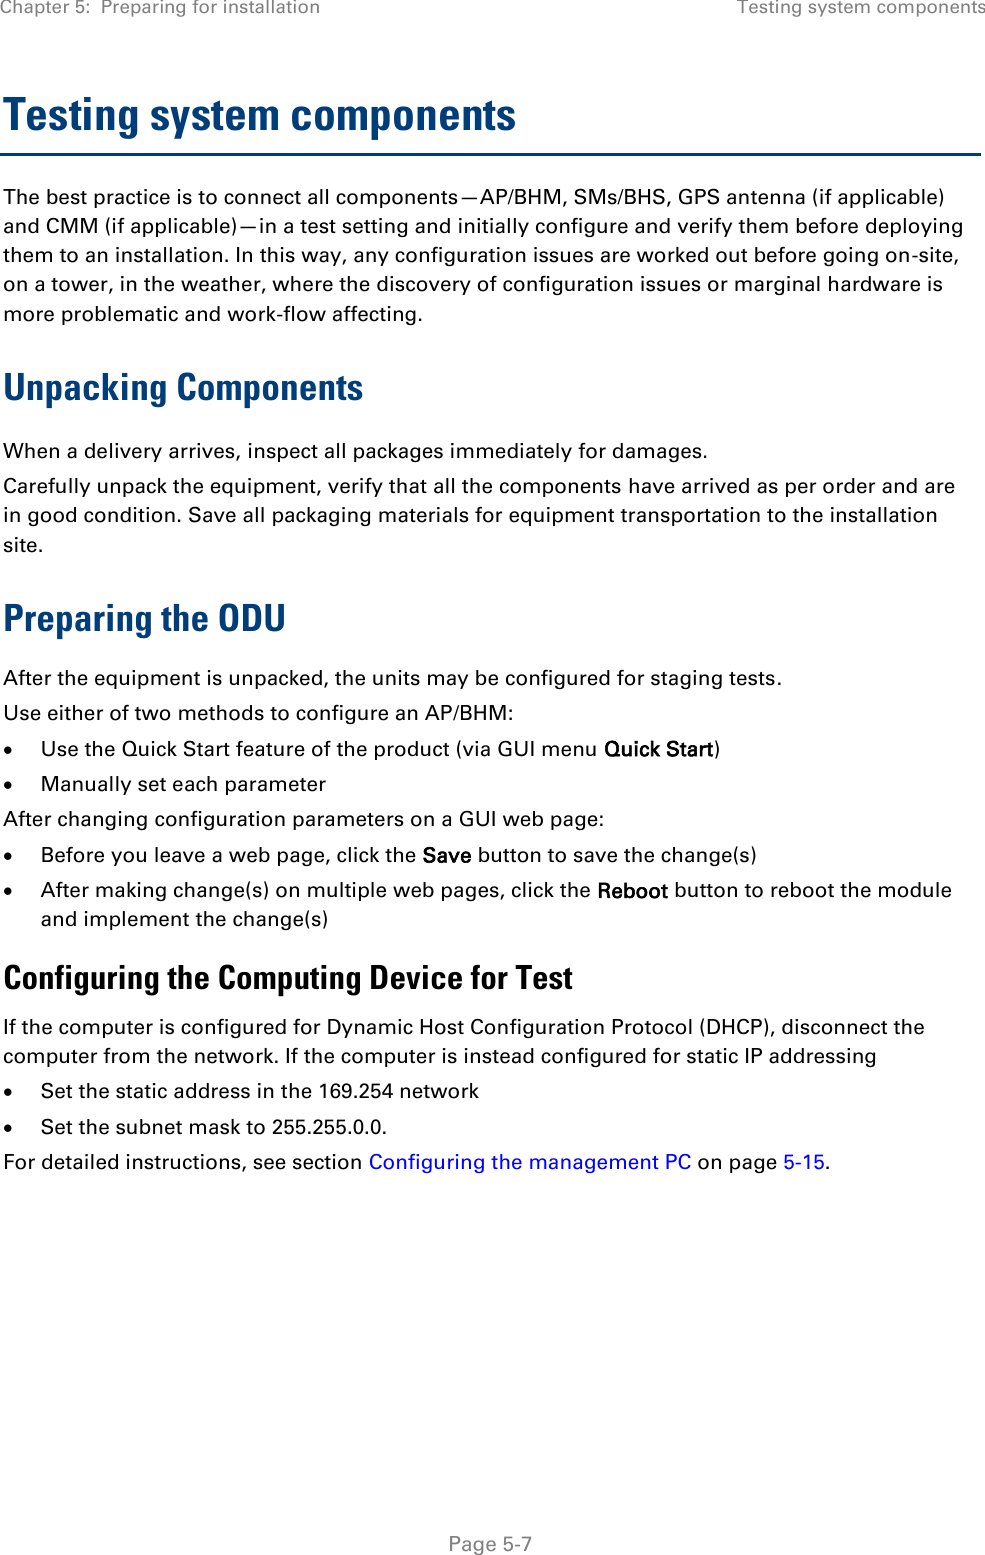 Chapter 5:  Preparing for installation Testing system components   Page 5-7 Testing system components The best practice is to connect all components—AP/BHM, SMs/BHS, GPS antenna (if applicable) and CMM (if applicable)—in a test setting and initially configure and verify them before deploying them to an installation. In this way, any configuration issues are worked out before going on-site, on a tower, in the weather, where the discovery of configuration issues or marginal hardware is more problematic and work-flow affecting. Unpacking Components When a delivery arrives, inspect all packages immediately for damages.  Carefully unpack the equipment, verify that all the components have arrived as per order and are in good condition. Save all packaging materials for equipment transportation to the installation site.  Preparing the ODU After the equipment is unpacked, the units may be configured for staging tests. Use either of two methods to configure an AP/BHM:  Use the Quick Start feature of the product (via GUI menu Quick Start)  Manually set each parameter After changing configuration parameters on a GUI web page:  Before you leave a web page, click the Save button to save the change(s)  After making change(s) on multiple web pages, click the Reboot button to reboot the module and implement the change(s) Configuring the Computing Device for Test If the computer is configured for Dynamic Host Configuration Protocol (DHCP), disconnect the computer from the network. If the computer is instead configured for static IP addressing  Set the static address in the 169.254 network   Set the subnet mask to 255.255.0.0. For detailed instructions, see section Configuring the management PC on page 5-15.    